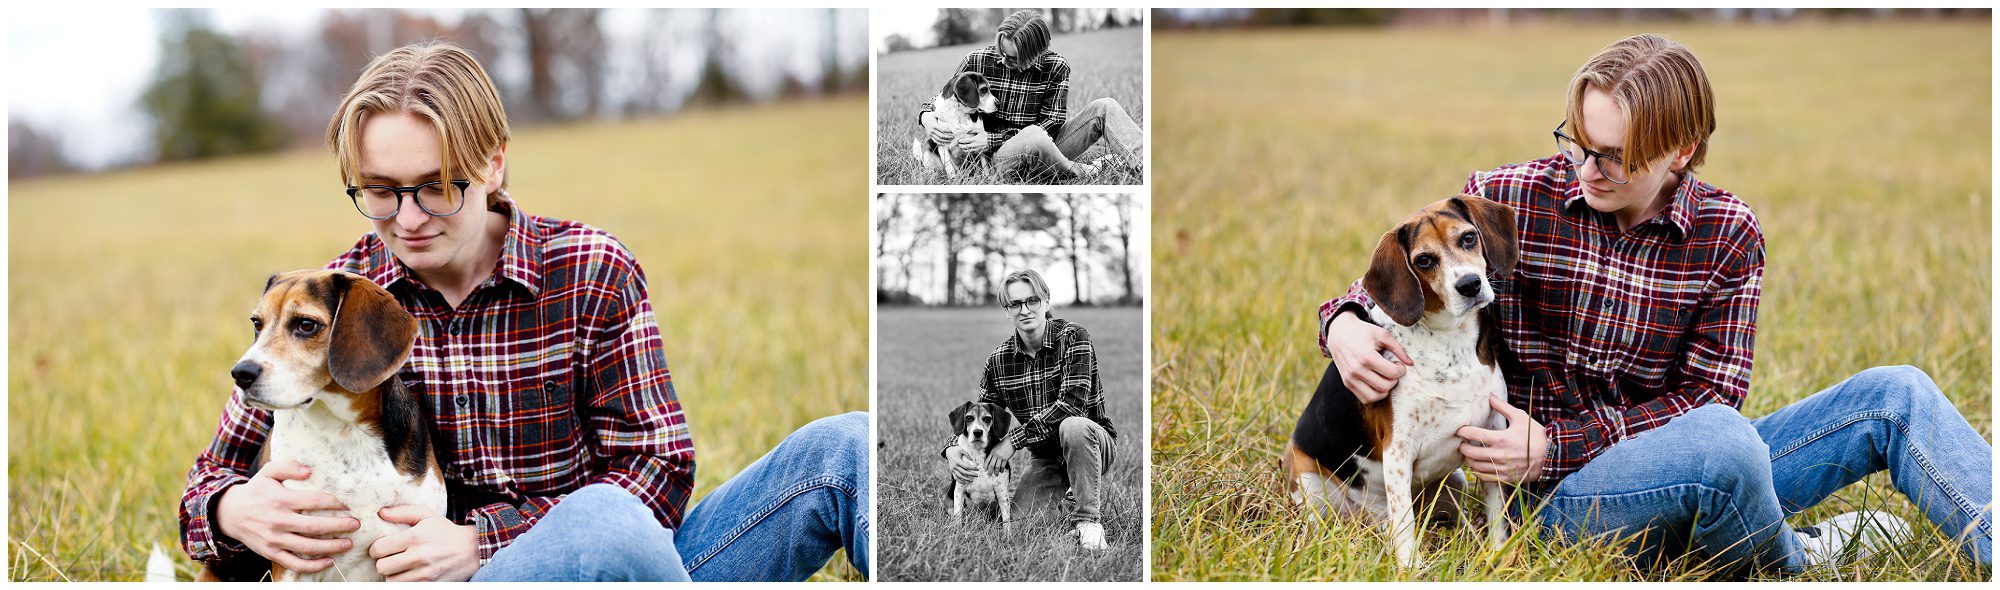 Turner Ashby High School Senior Fall Portraits in Fluvanna Photographer Charlottesville Cville Photography Pictures Photoshoot Farm Dog Pet Class of 2022